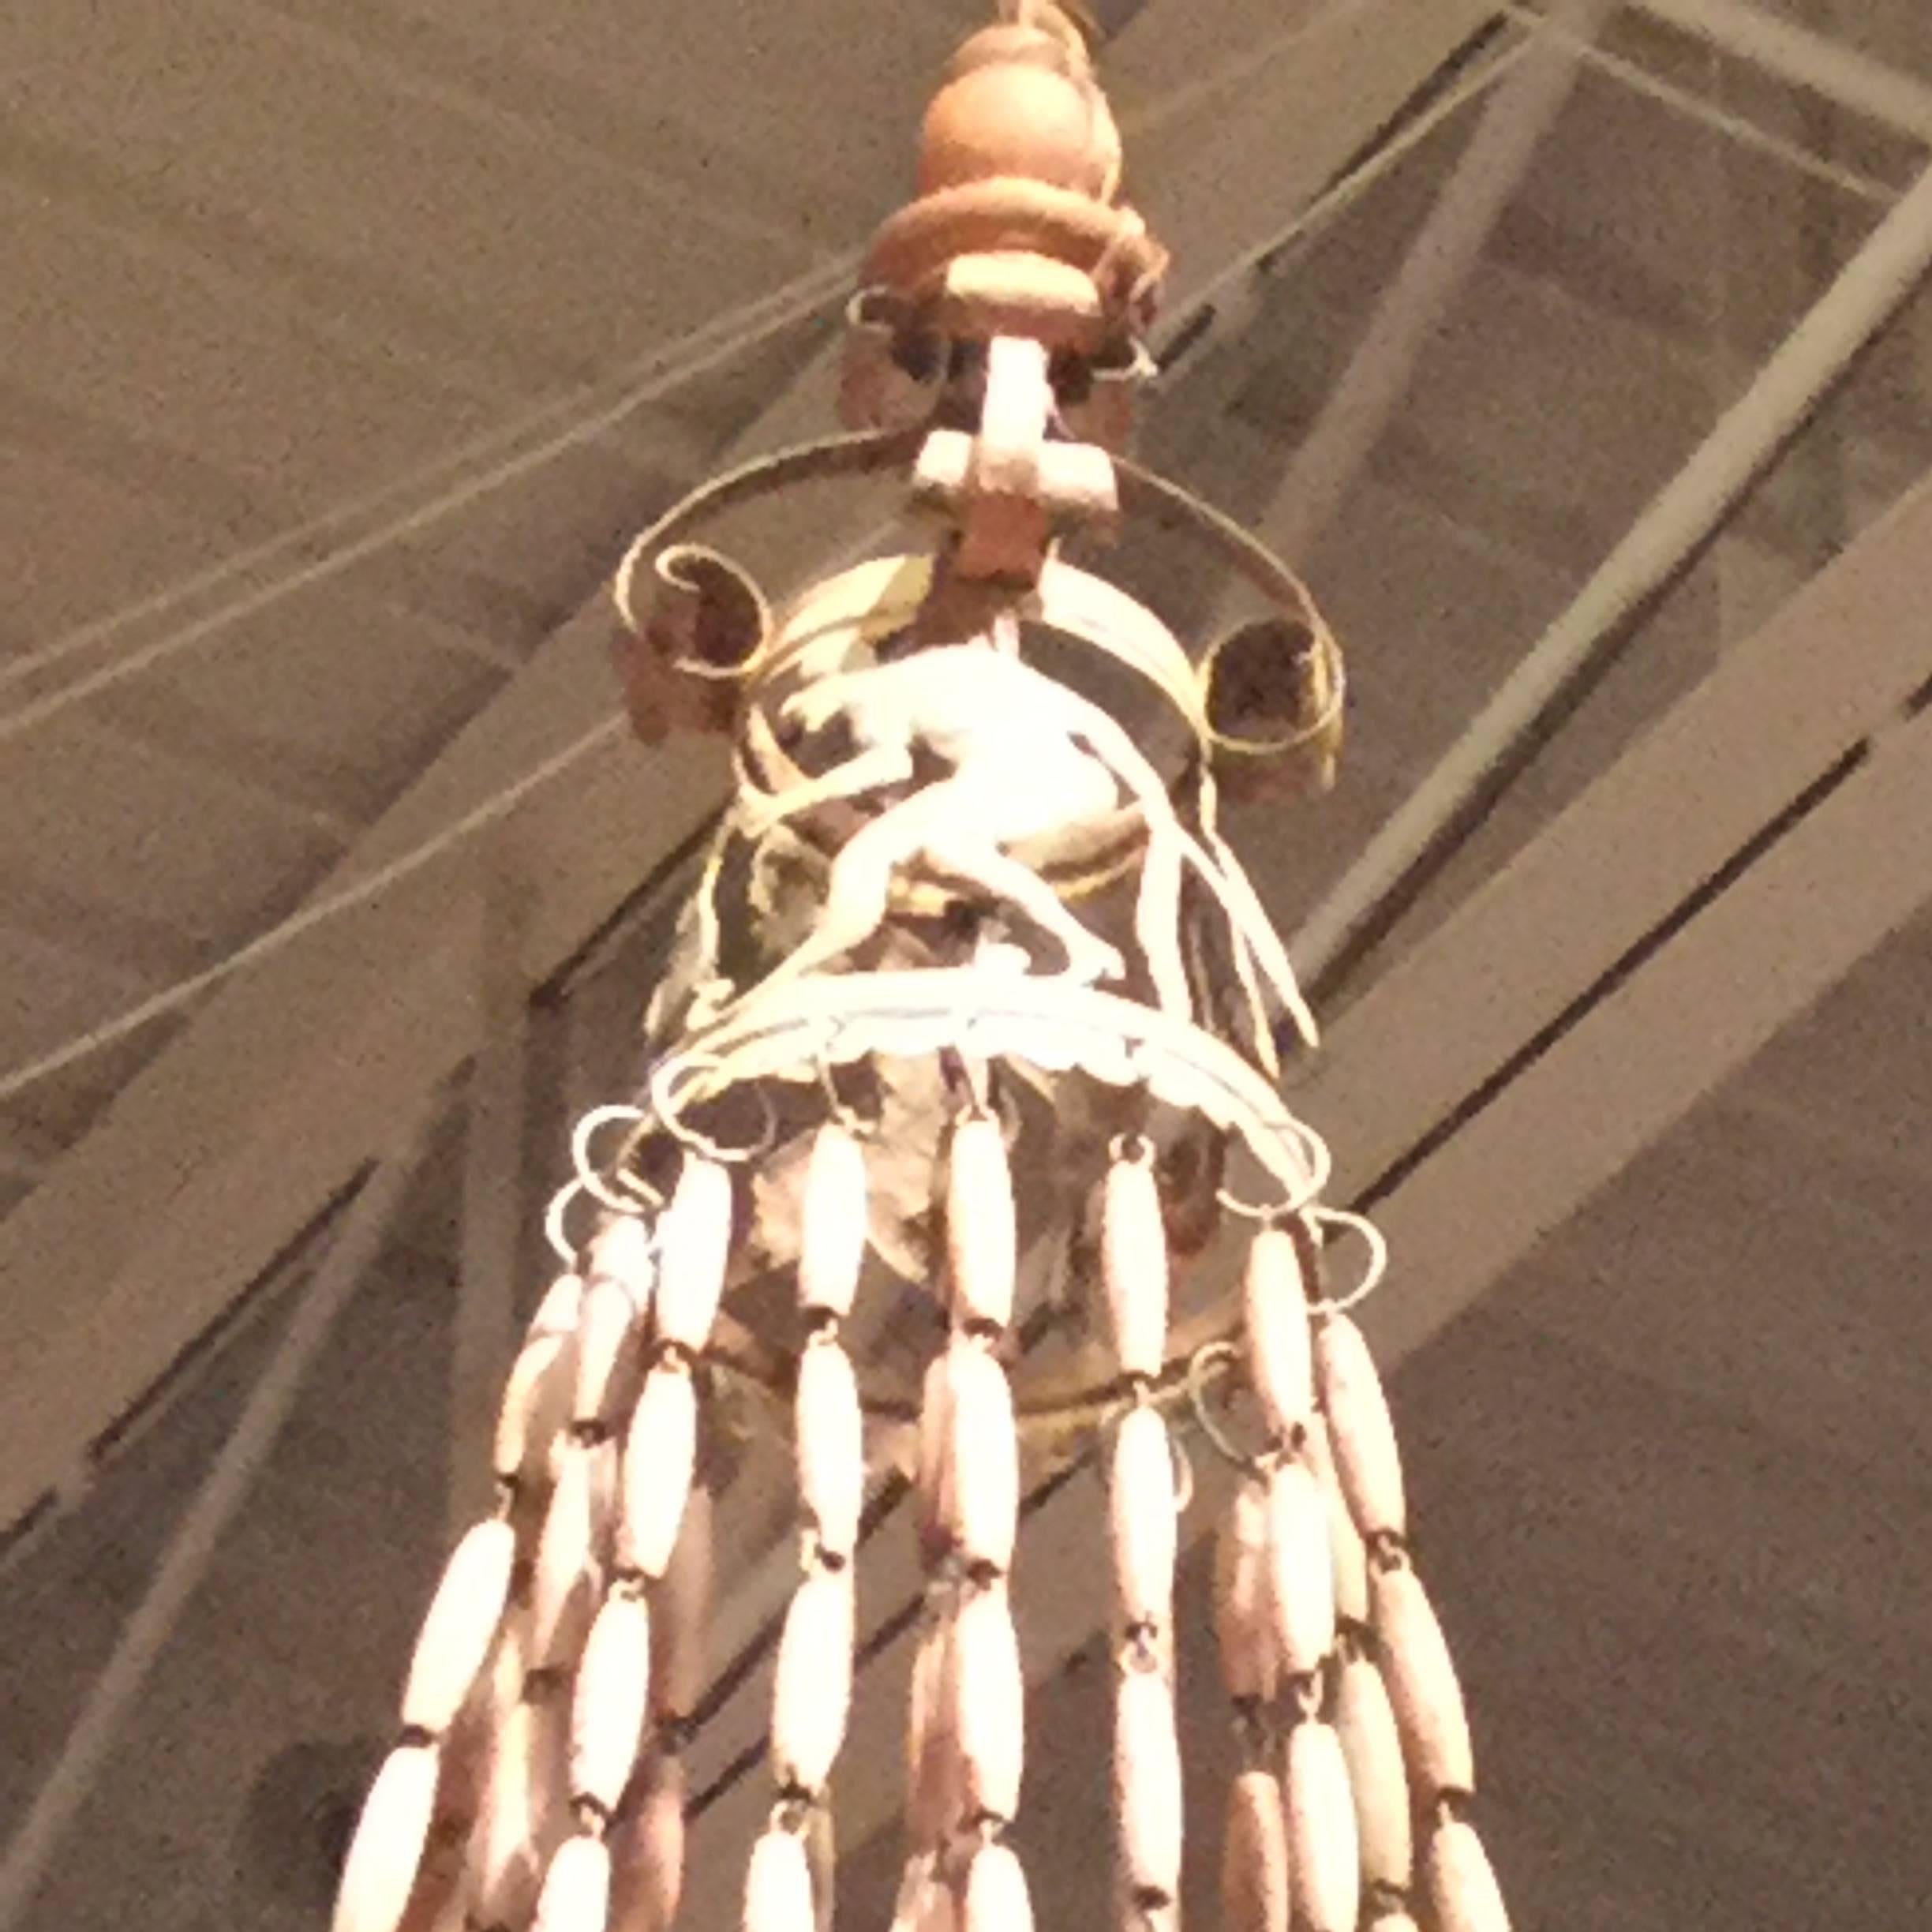 A large four-light Italian wooden beaded chandelier in a light a terracotta color with ornate candleholders that has been newly wired. This is easily shortened around the top if desired. Iron with wooden beads.



